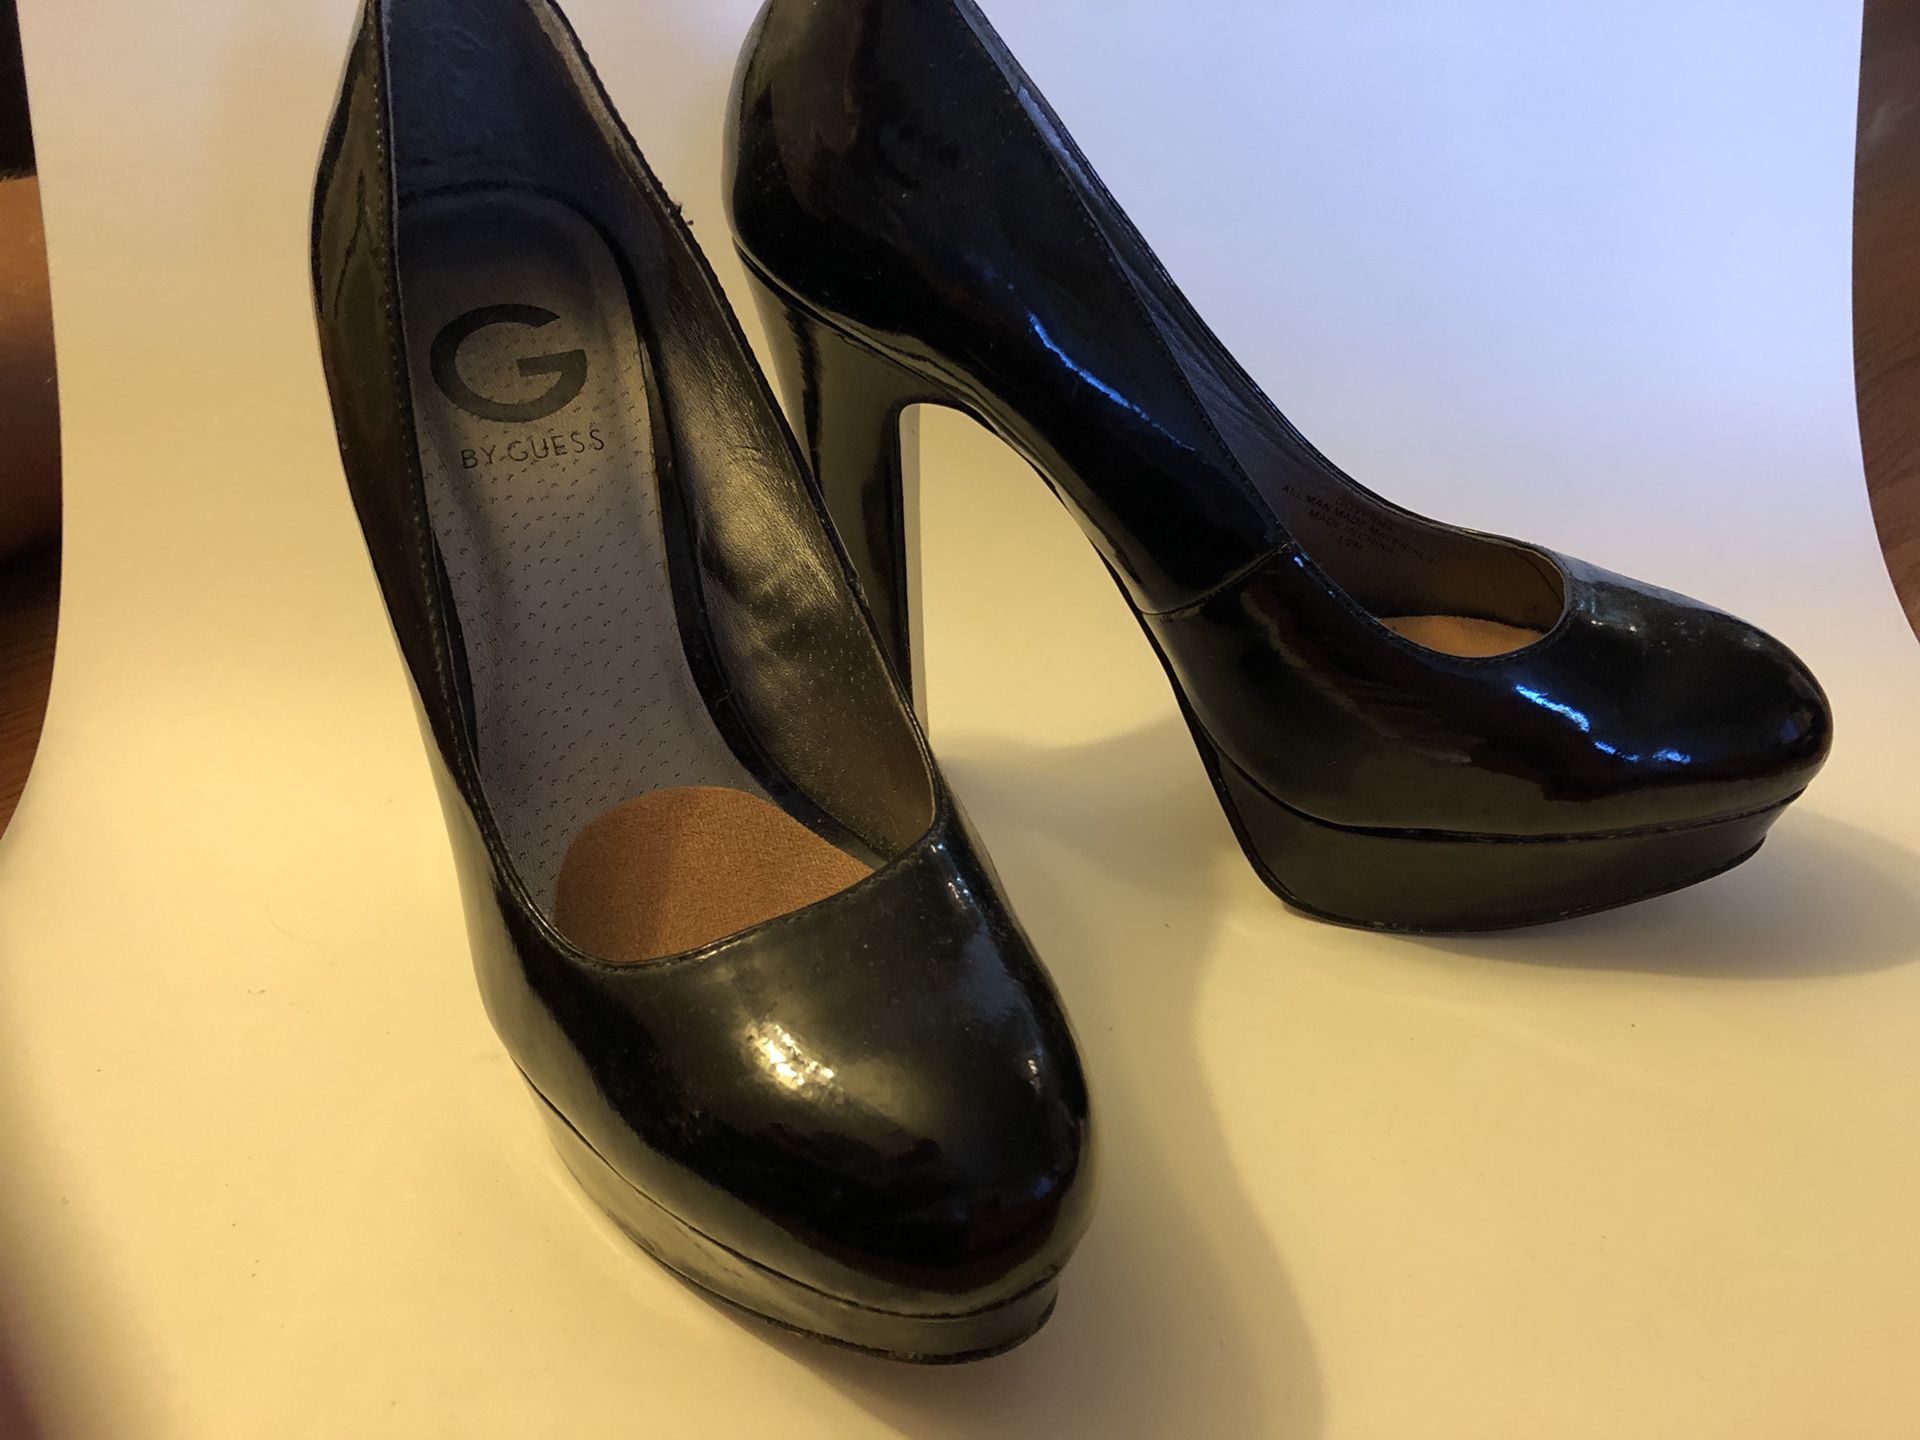 G by Guess - $25 size 7.5M